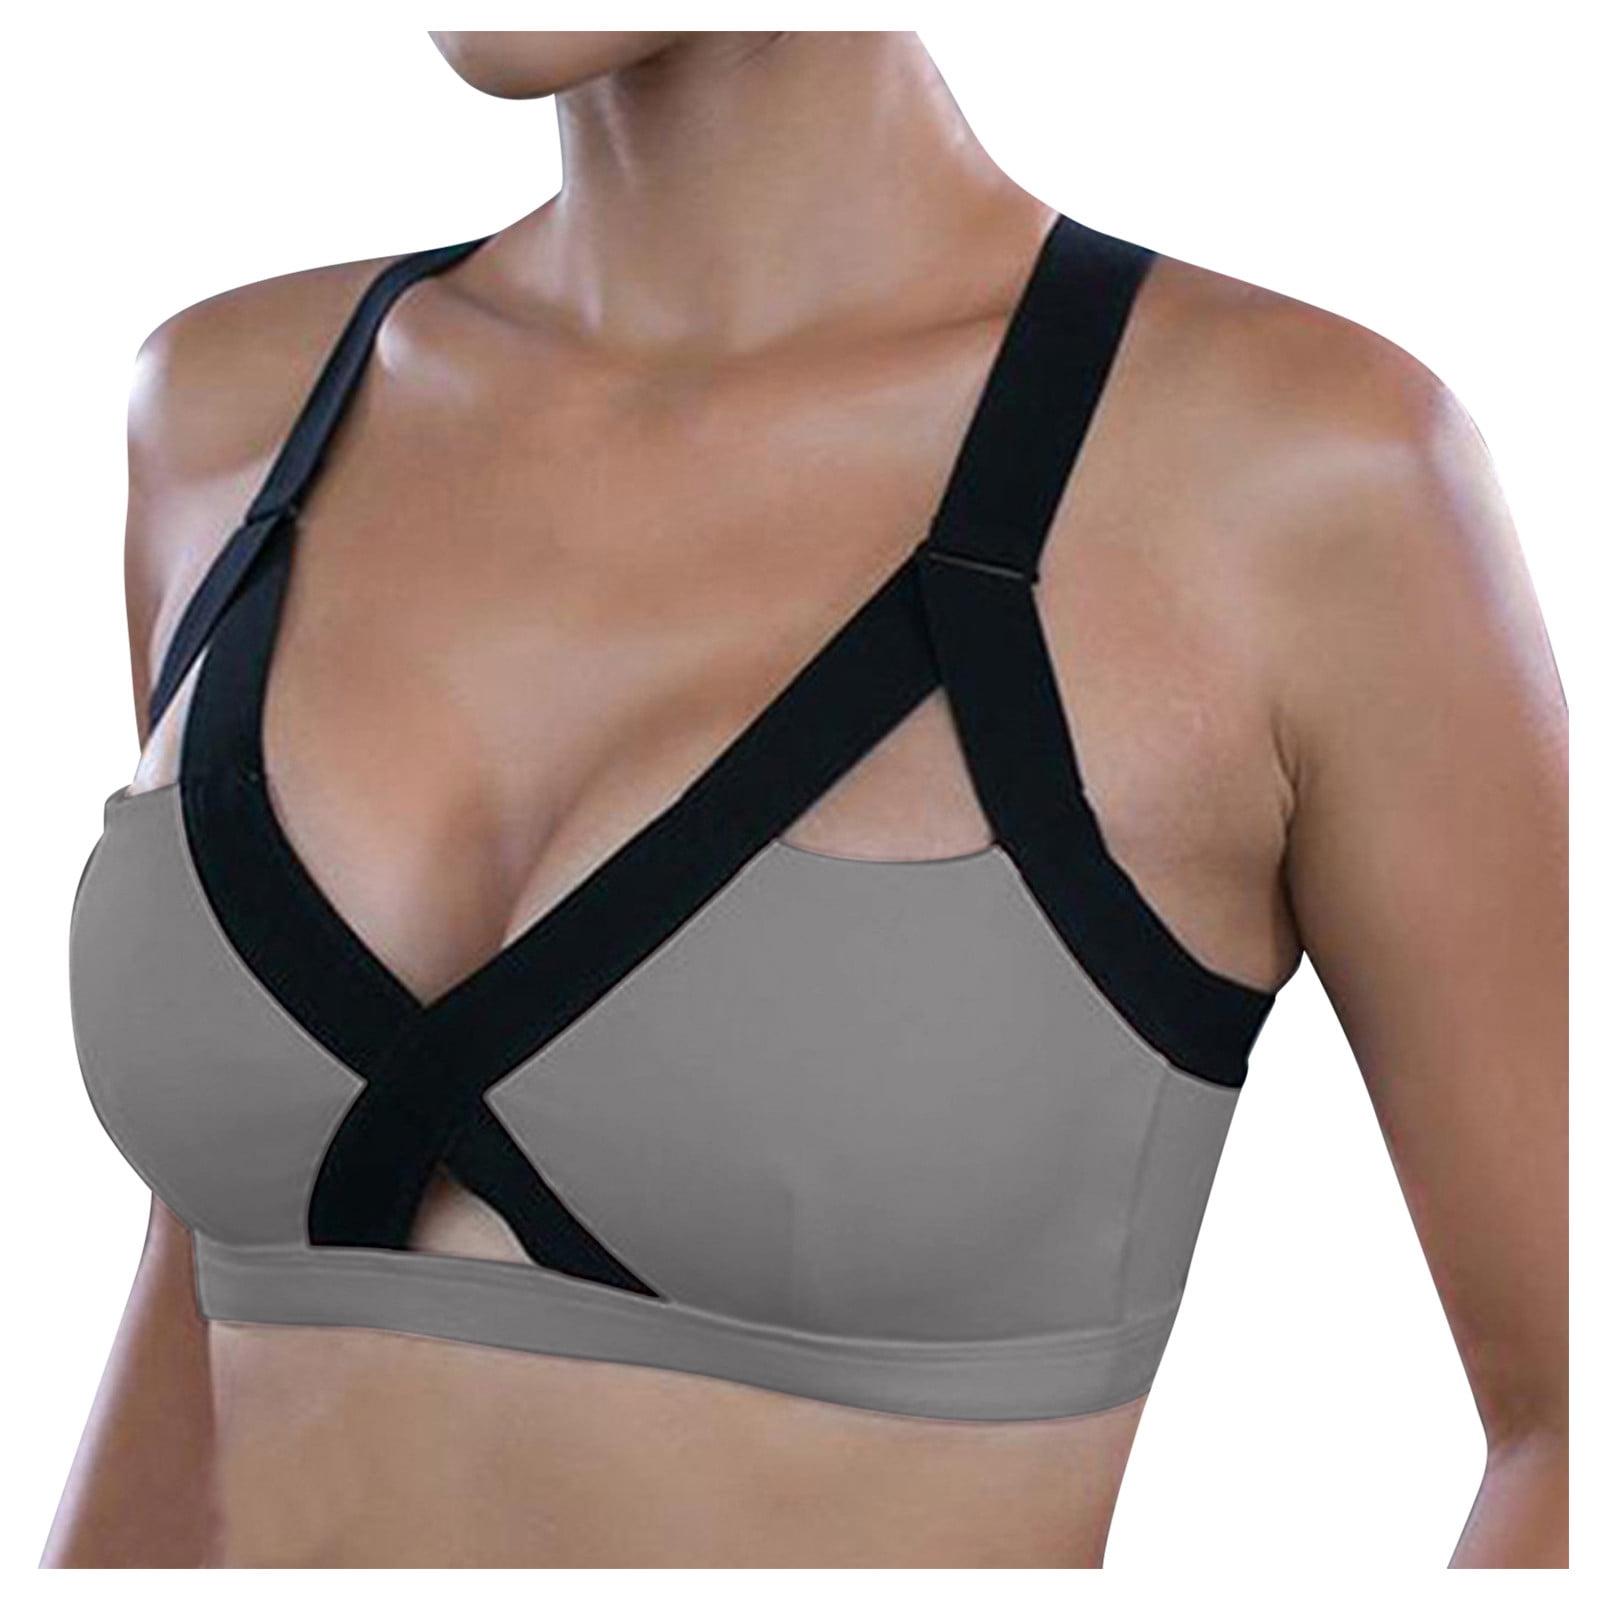 gvdentm Sports Bras For Women High Support Large Bust Underwire